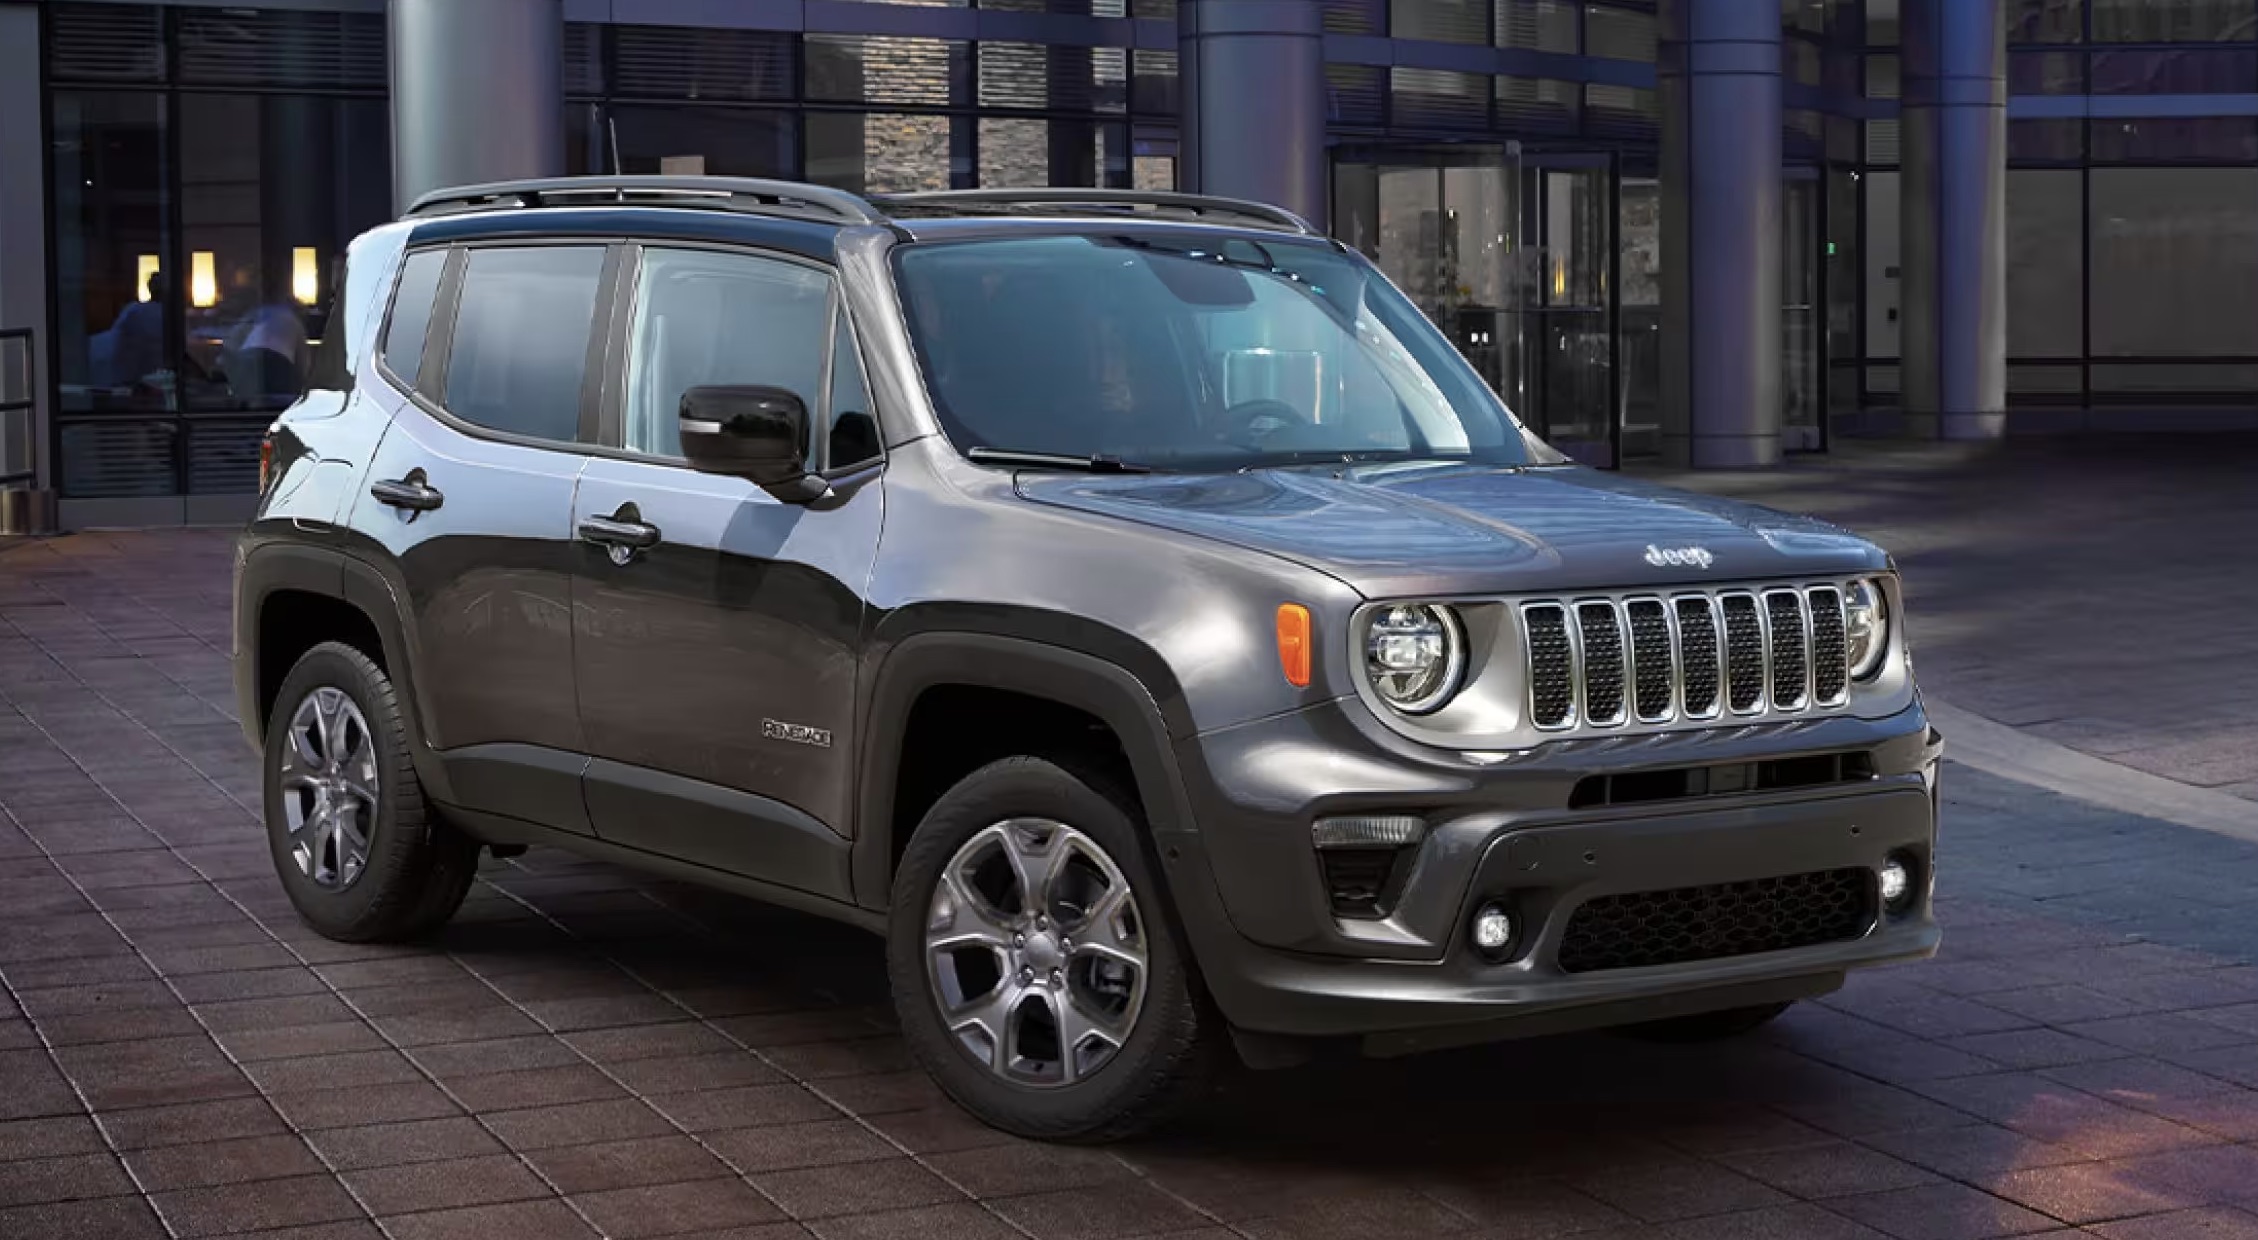 Used Jeep Renegade in Madison Wisconsin from Bachrodt Baraboo Motors.